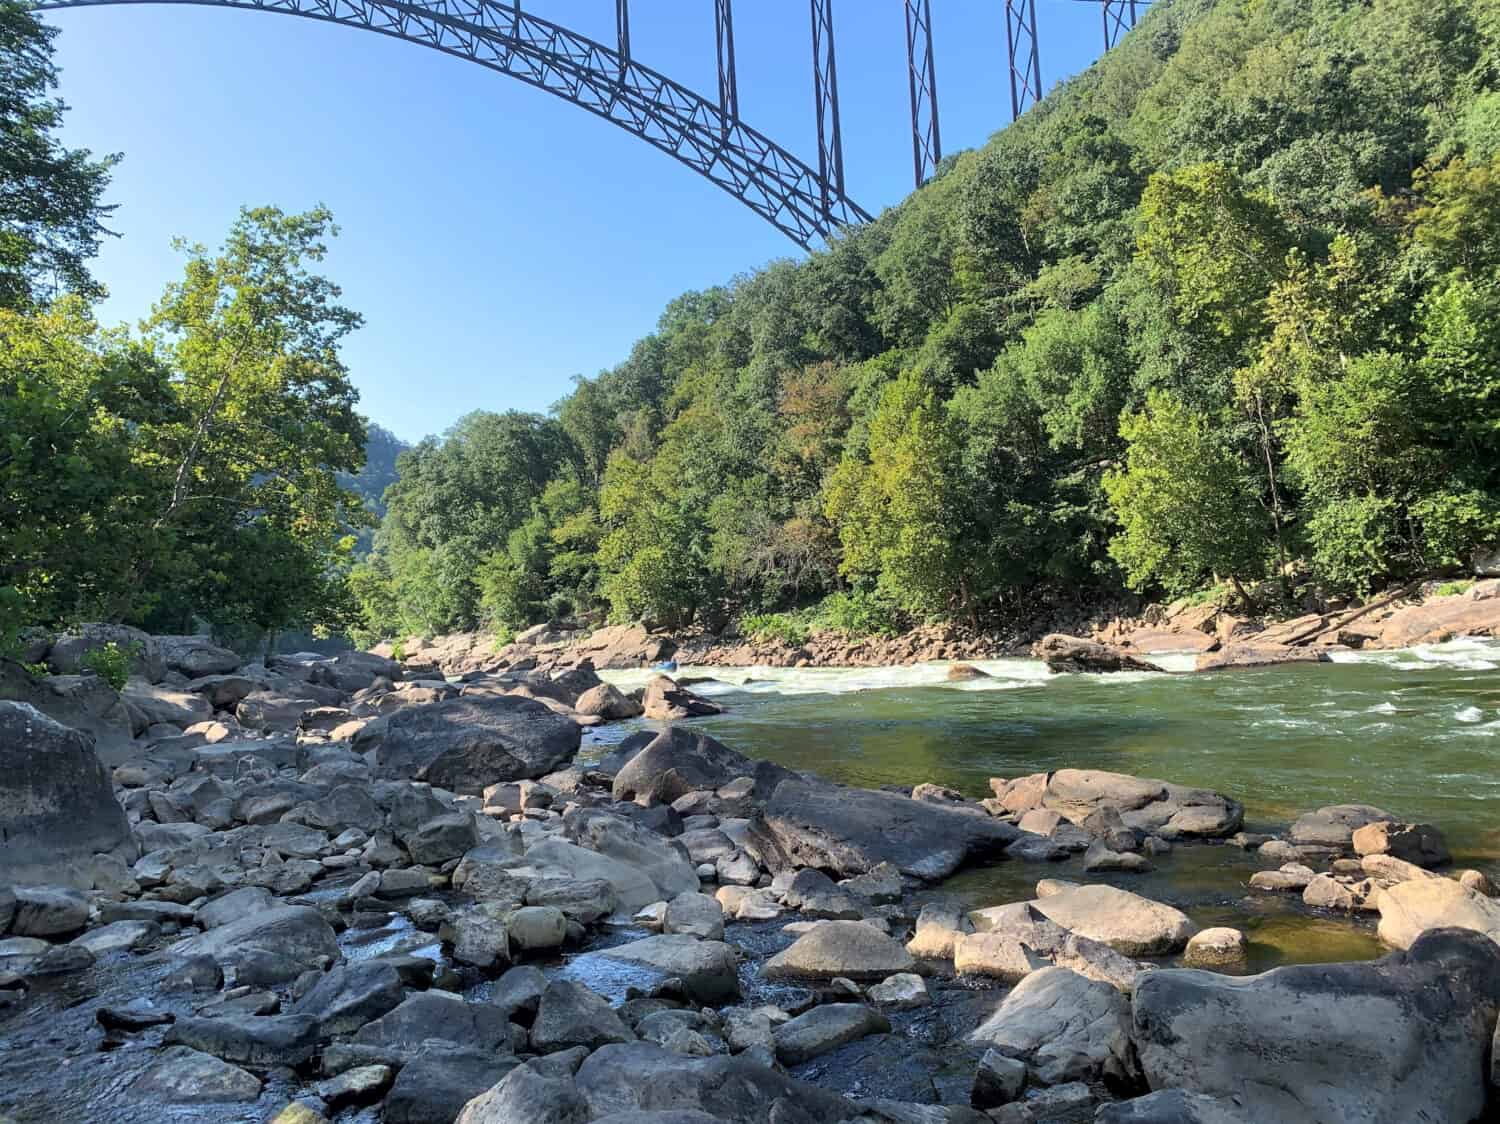 This is a photo of the Bridge in Beckley West Virginia and the New River Gorge under the bridge.